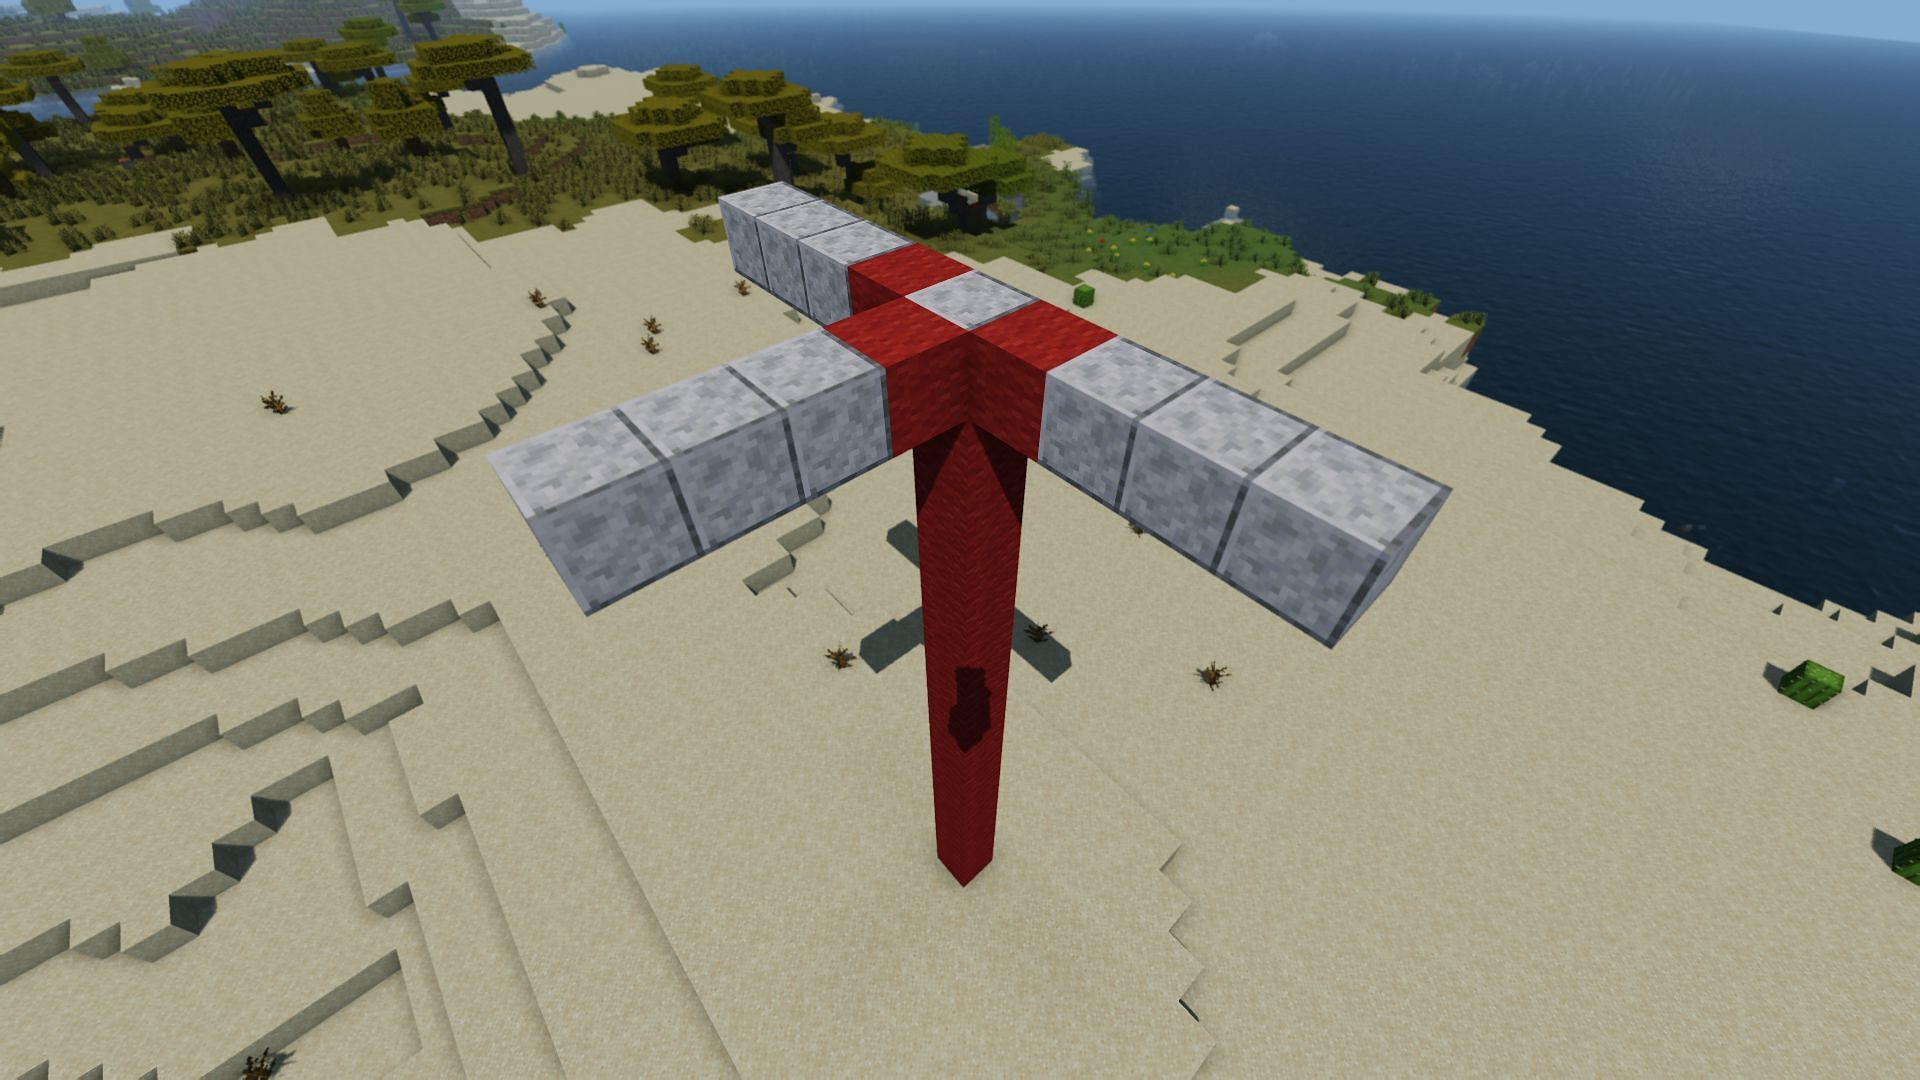 The foundation of the iron farm, built up in the air (Image via Minecraft)